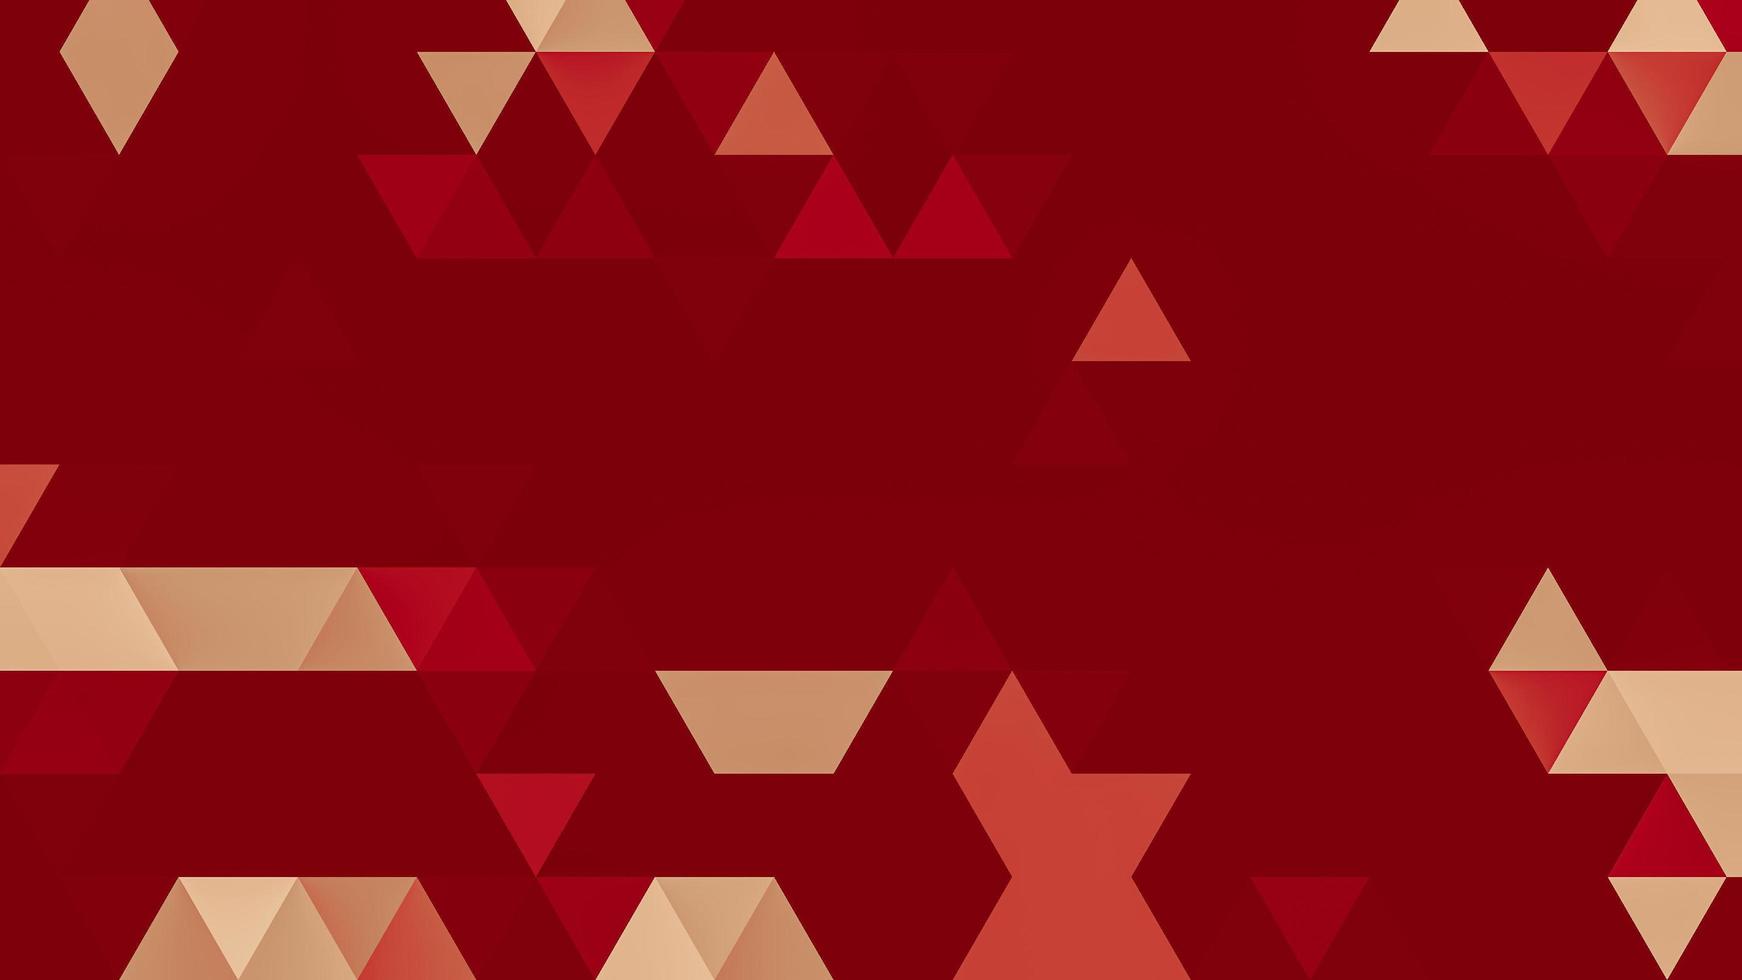 Red polygonal pattern Abstract geometric background Triangular mosaic, perfect for website, mobile, app, advertisement, social media photo